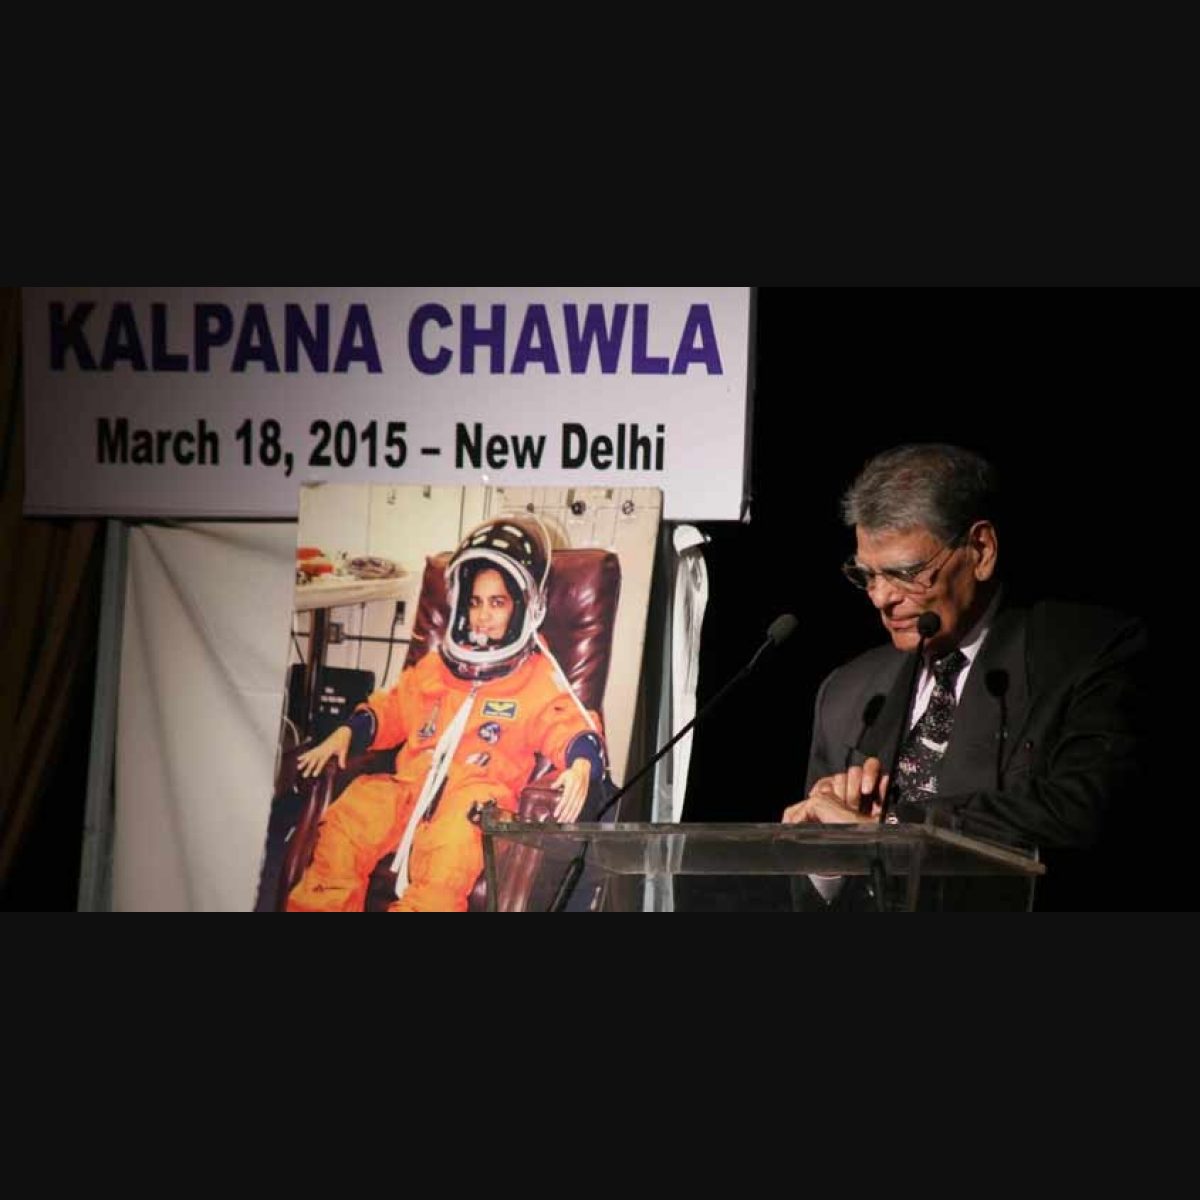 She wanted to fly, I let her fly: Kalpana Chawla's dad | Women ...